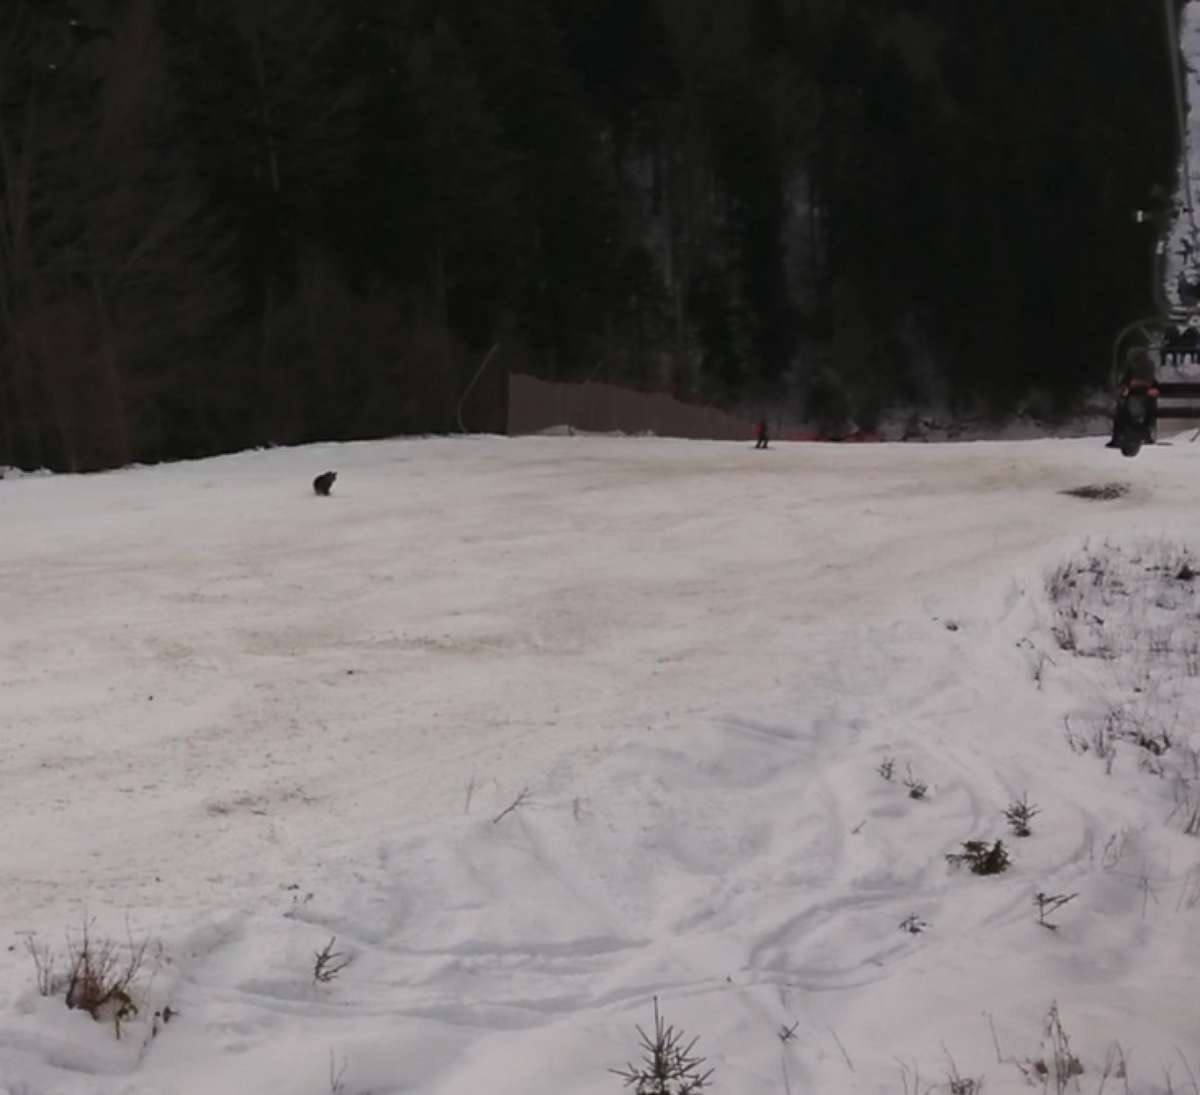 PHOTO: A bear was seen chasing a skier down the slope at the Predeal mountain resort in Romania on Jan. 23, 2021.
